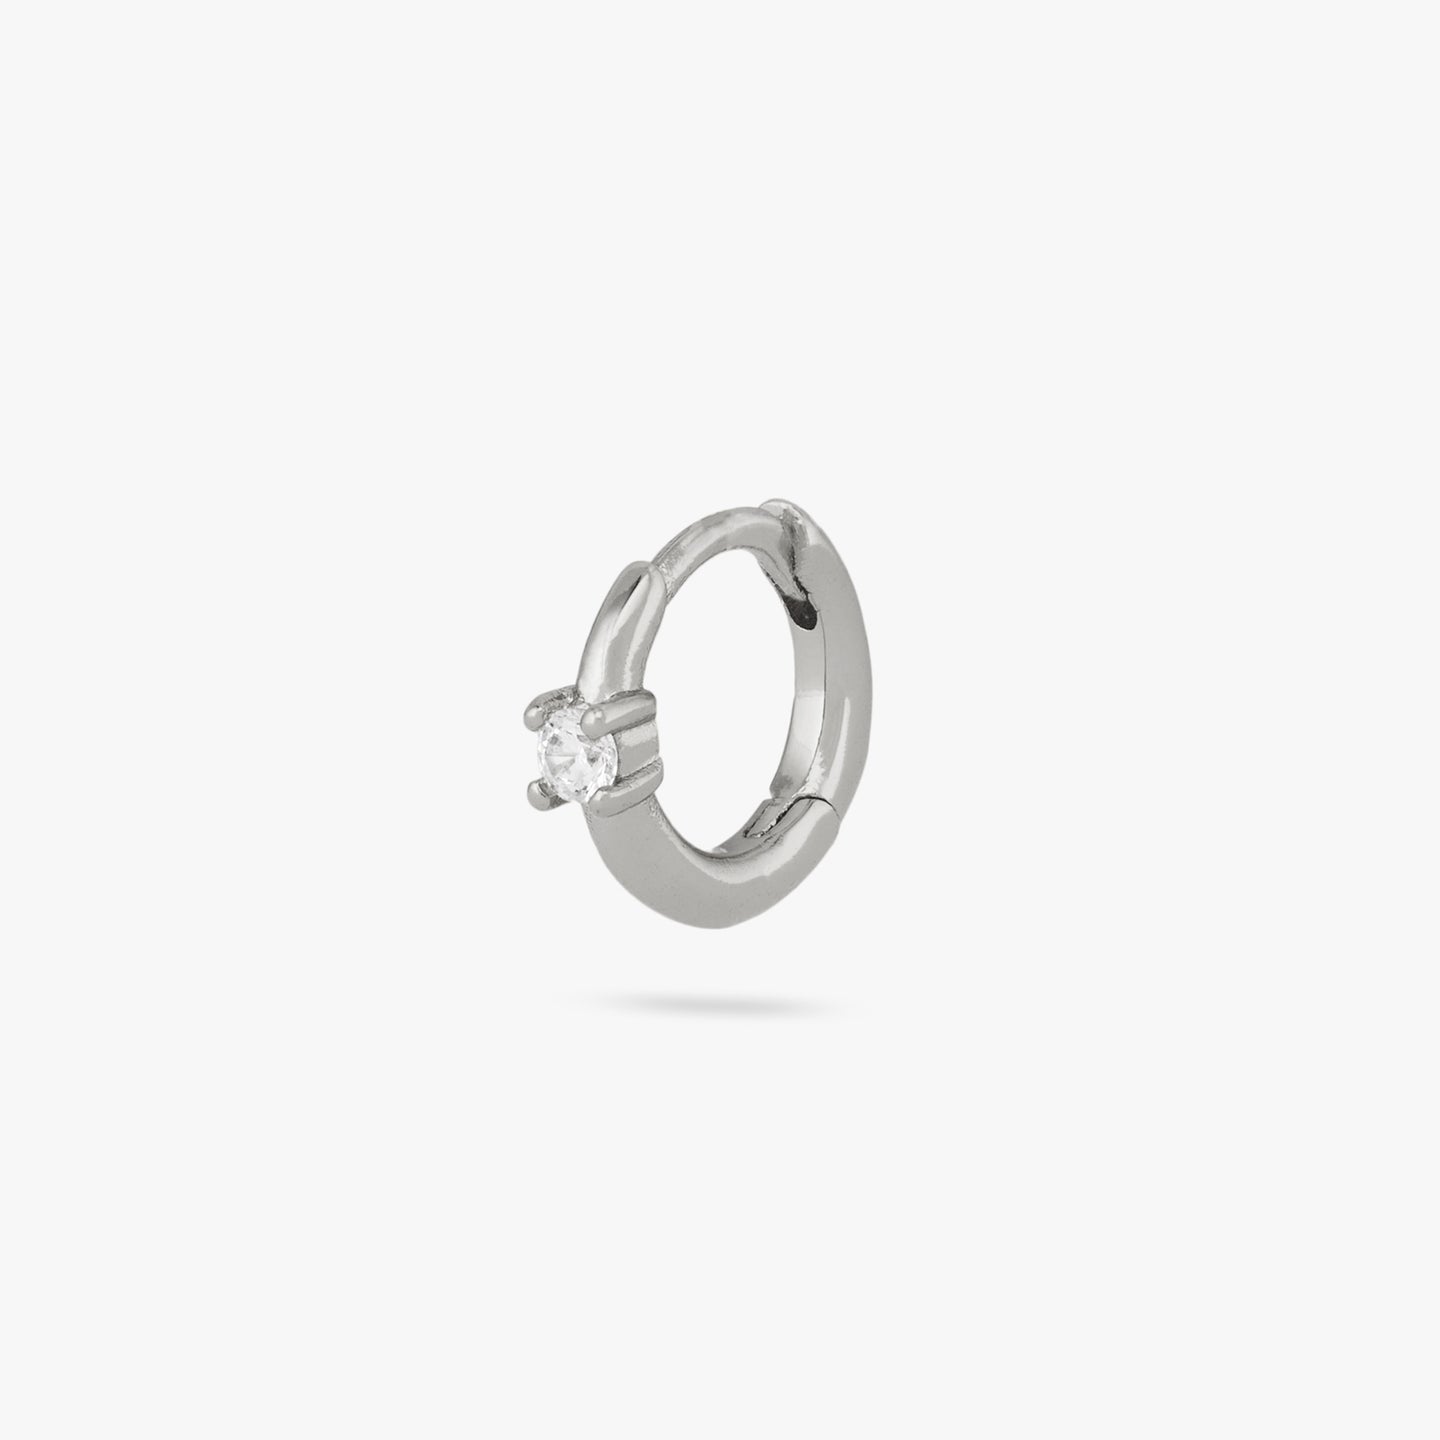 This is a small silver huggie with a clear cz detail color:null|silver/clear